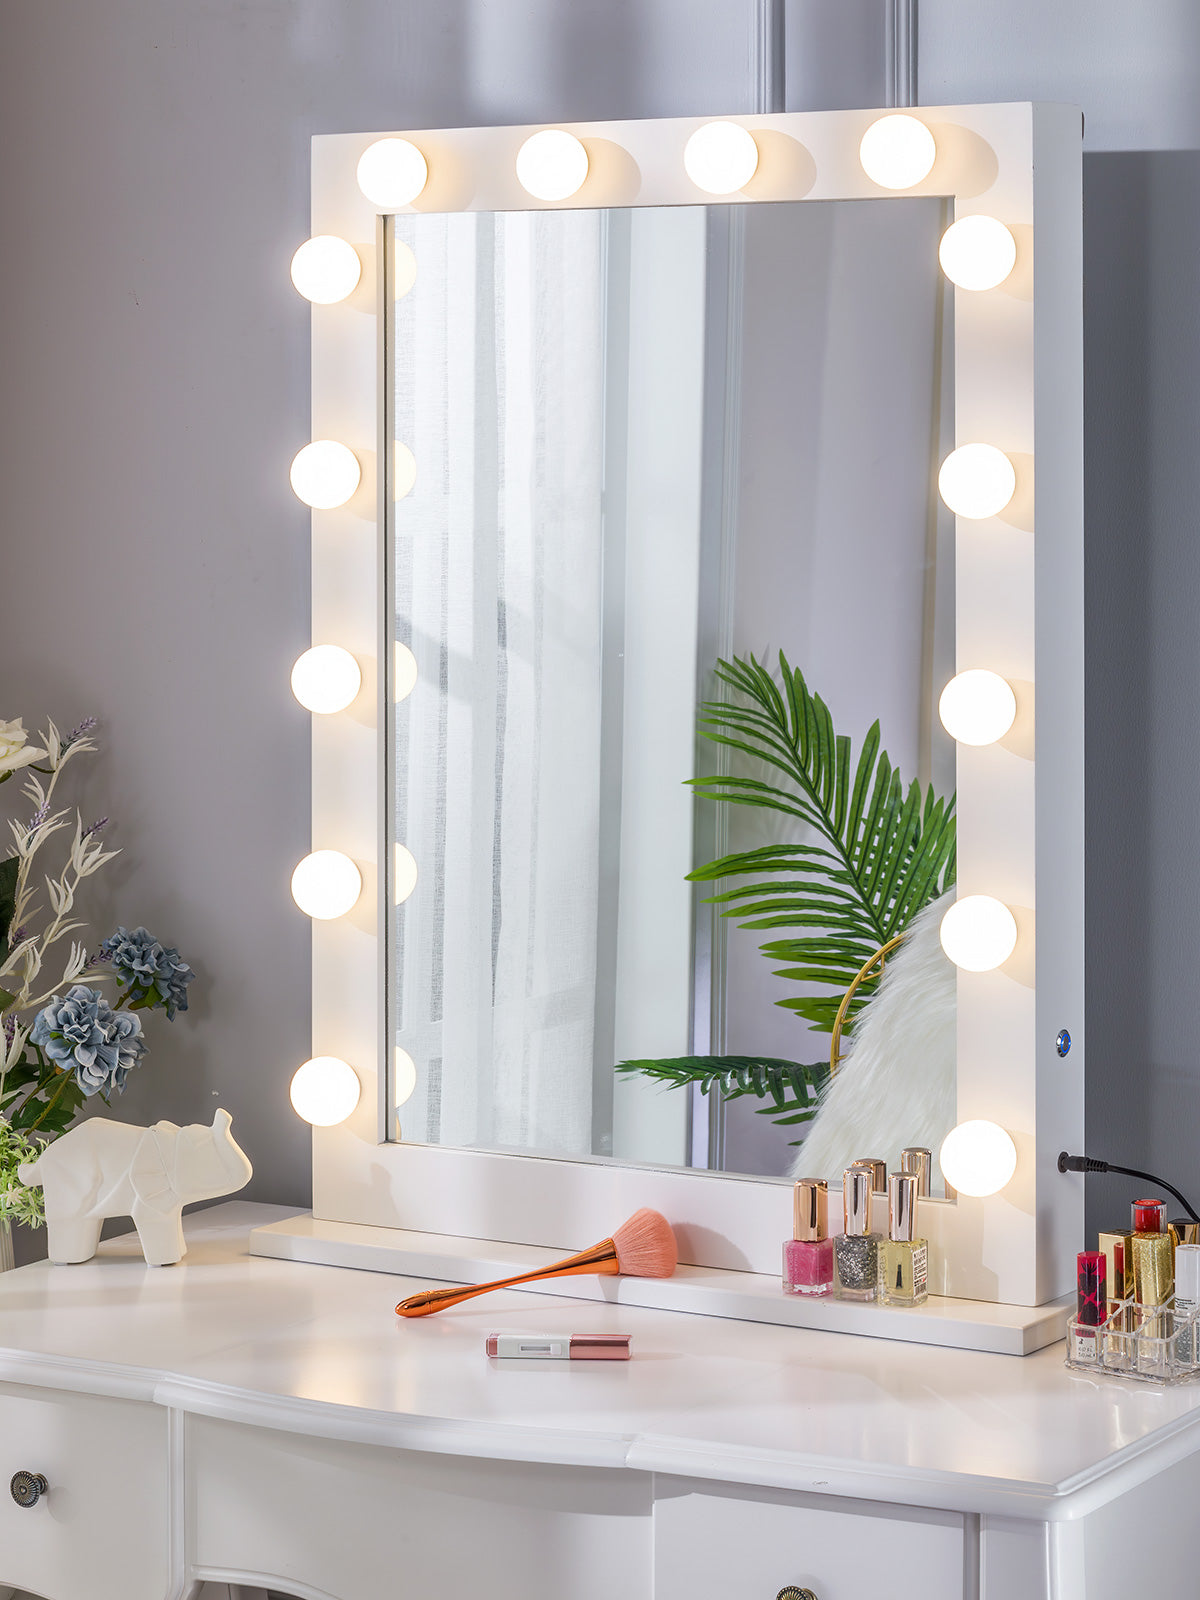 LUXFURNI Large Hollywood Vanity Mirror with 14 LED Lights Tabletop Wall Mount White, Size: 25.20 x 7.10 x 32.30